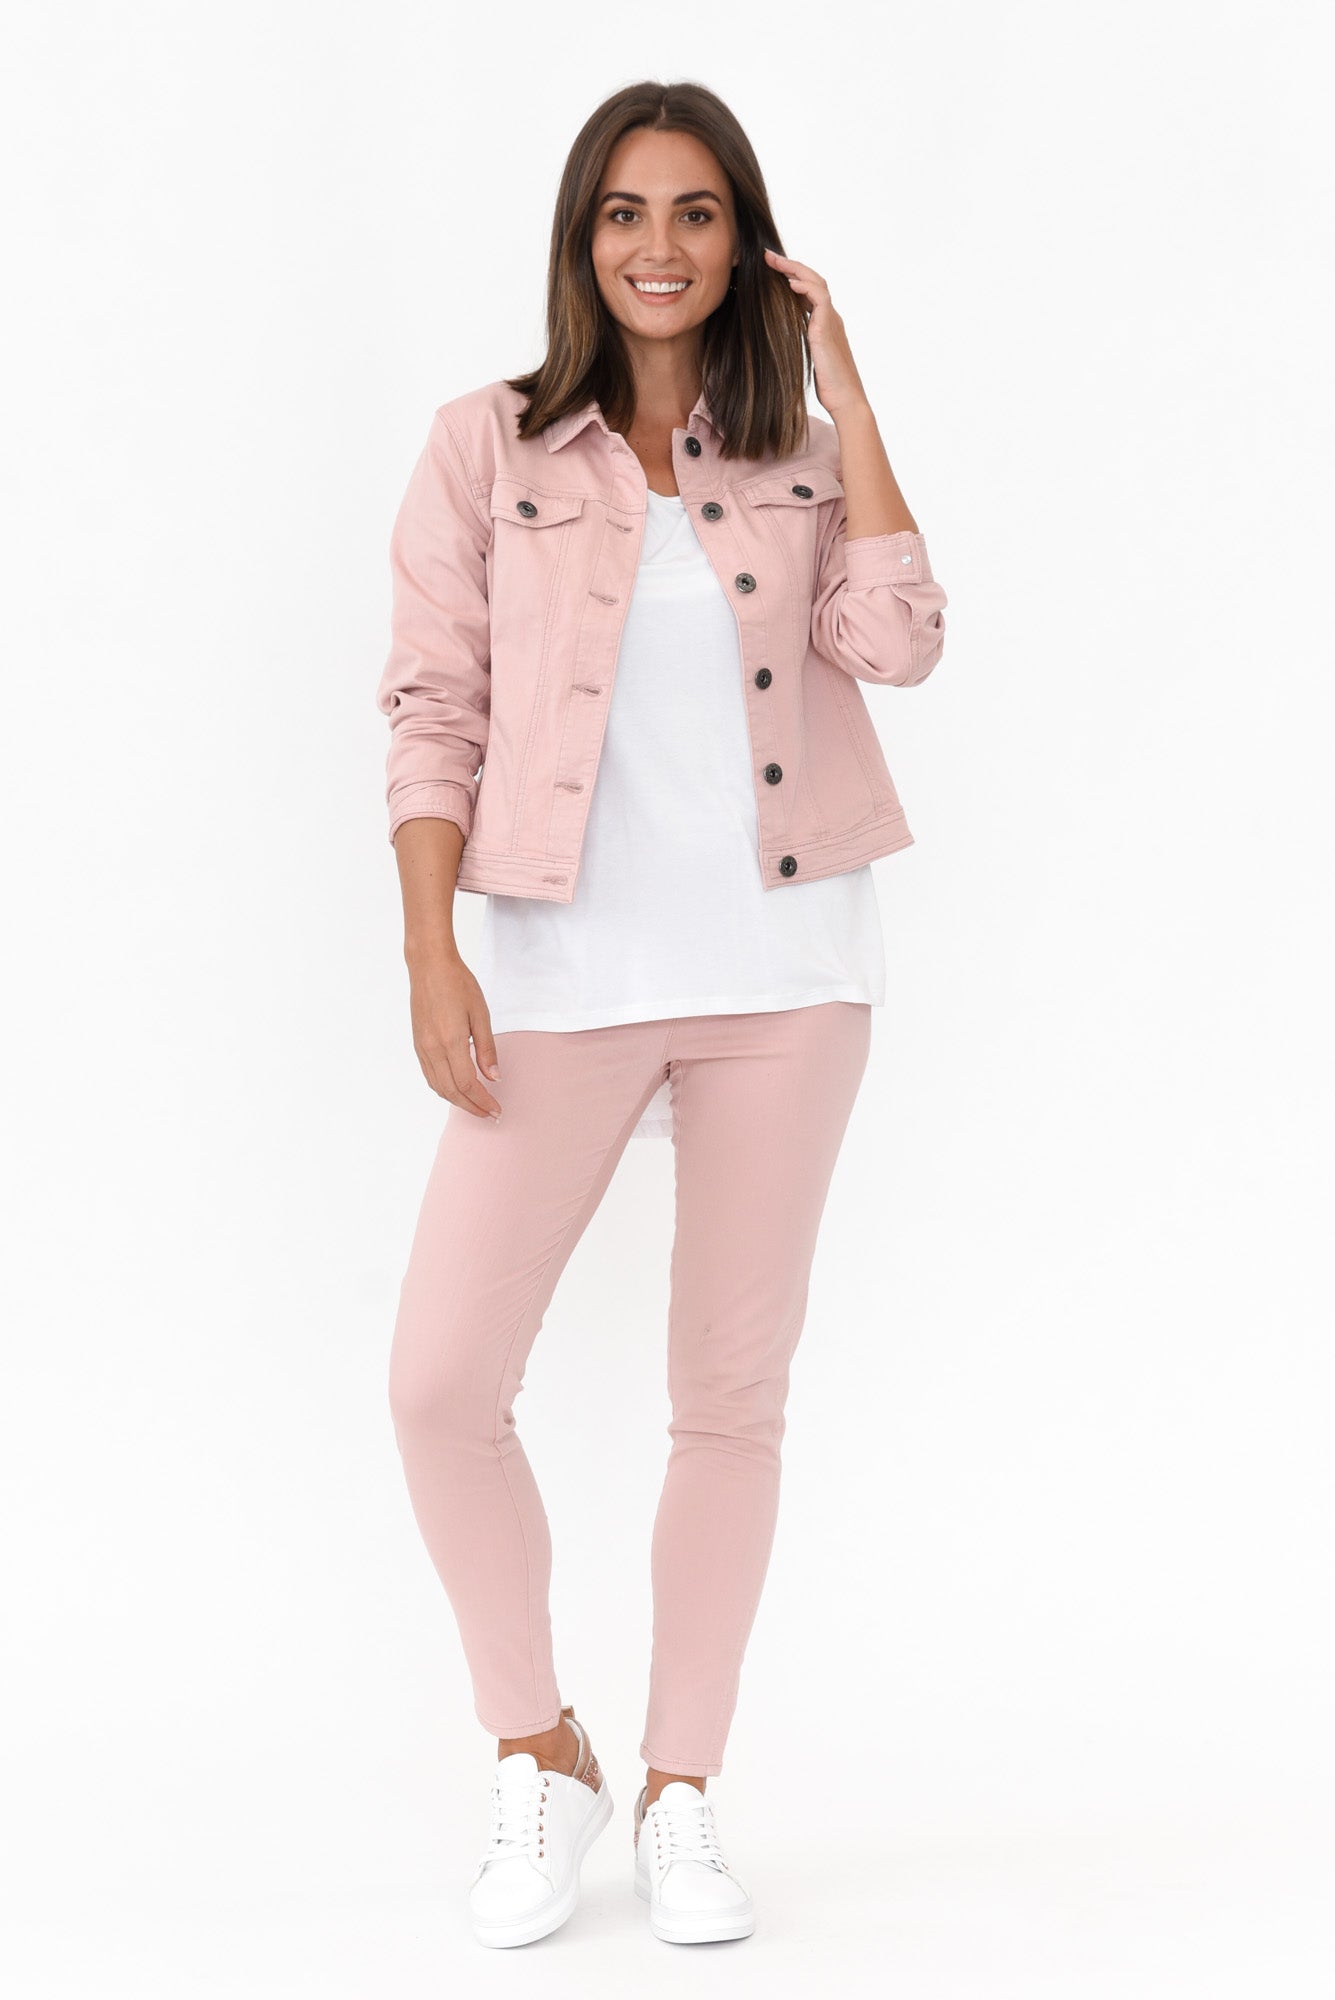 23 Stylish Pink Things That Are TOTALLY Plastics-Approved | Pink denim  jacket, Jacket outfits, Denim jacket women